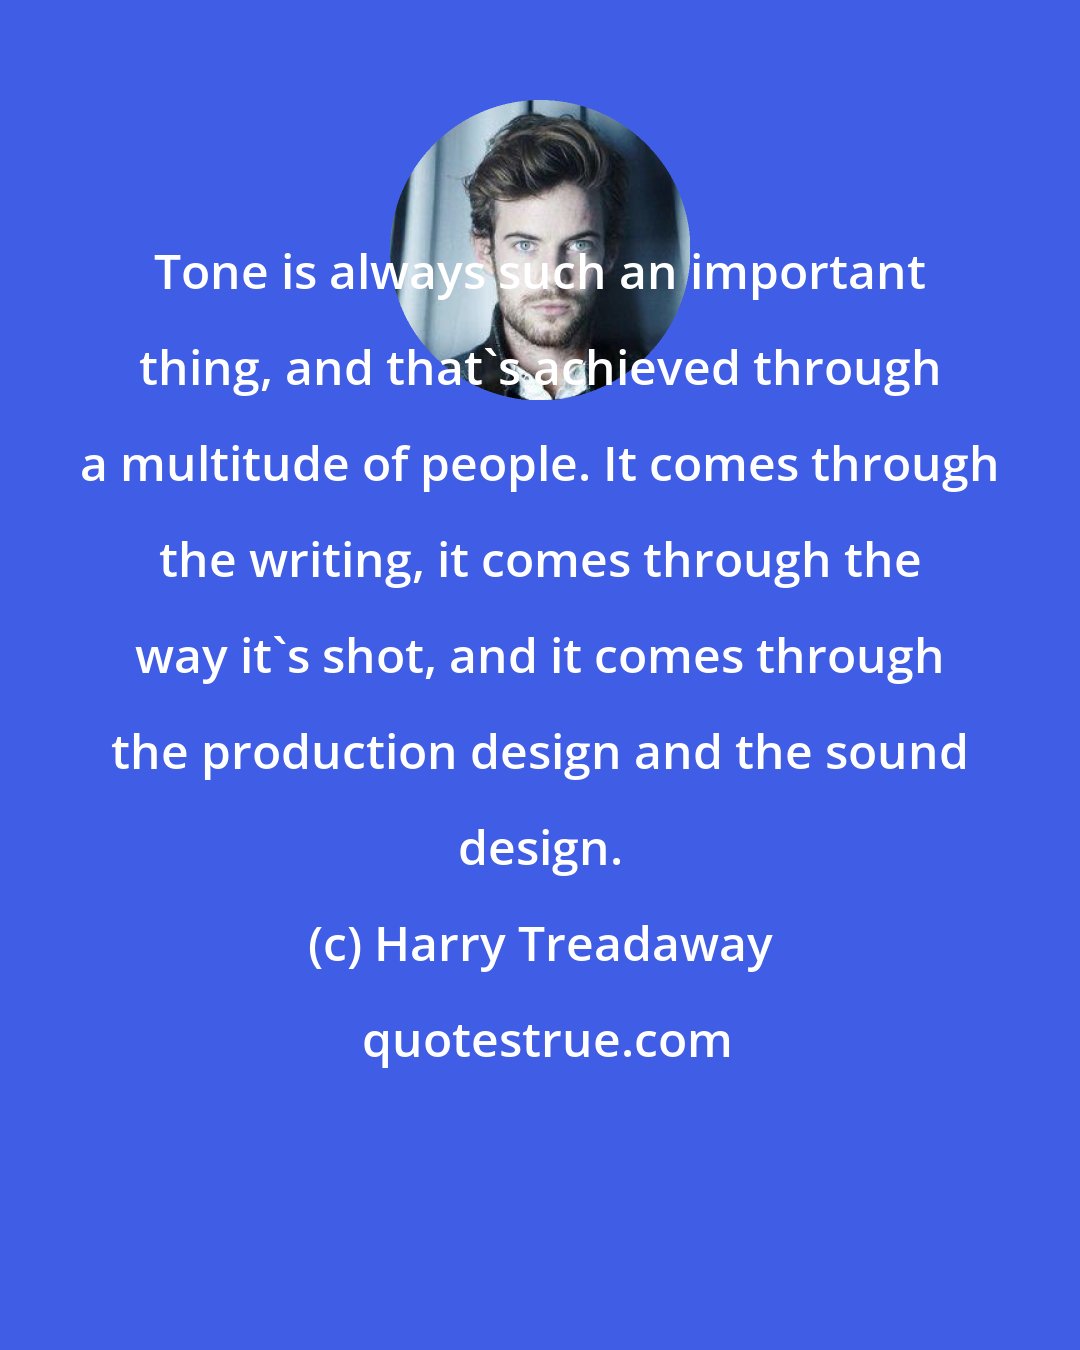 Harry Treadaway: Tone is always such an important thing, and that's achieved through a multitude of people. It comes through the writing, it comes through the way it's shot, and it comes through the production design and the sound design.